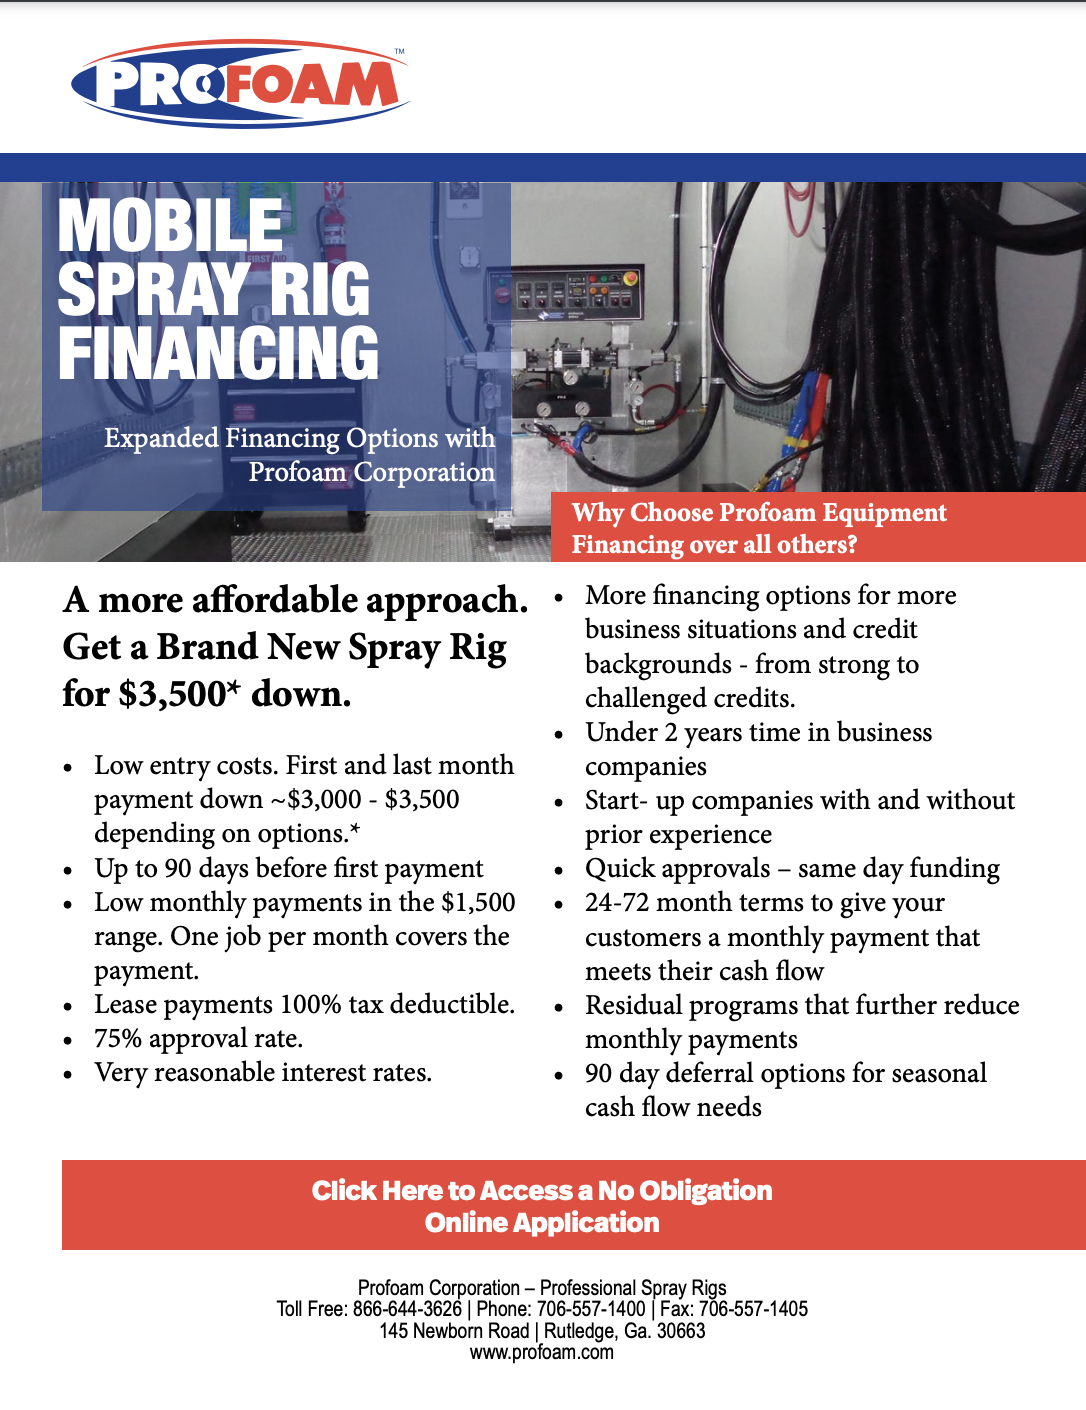 Mobile Spray Rig Financing Brochure and Application